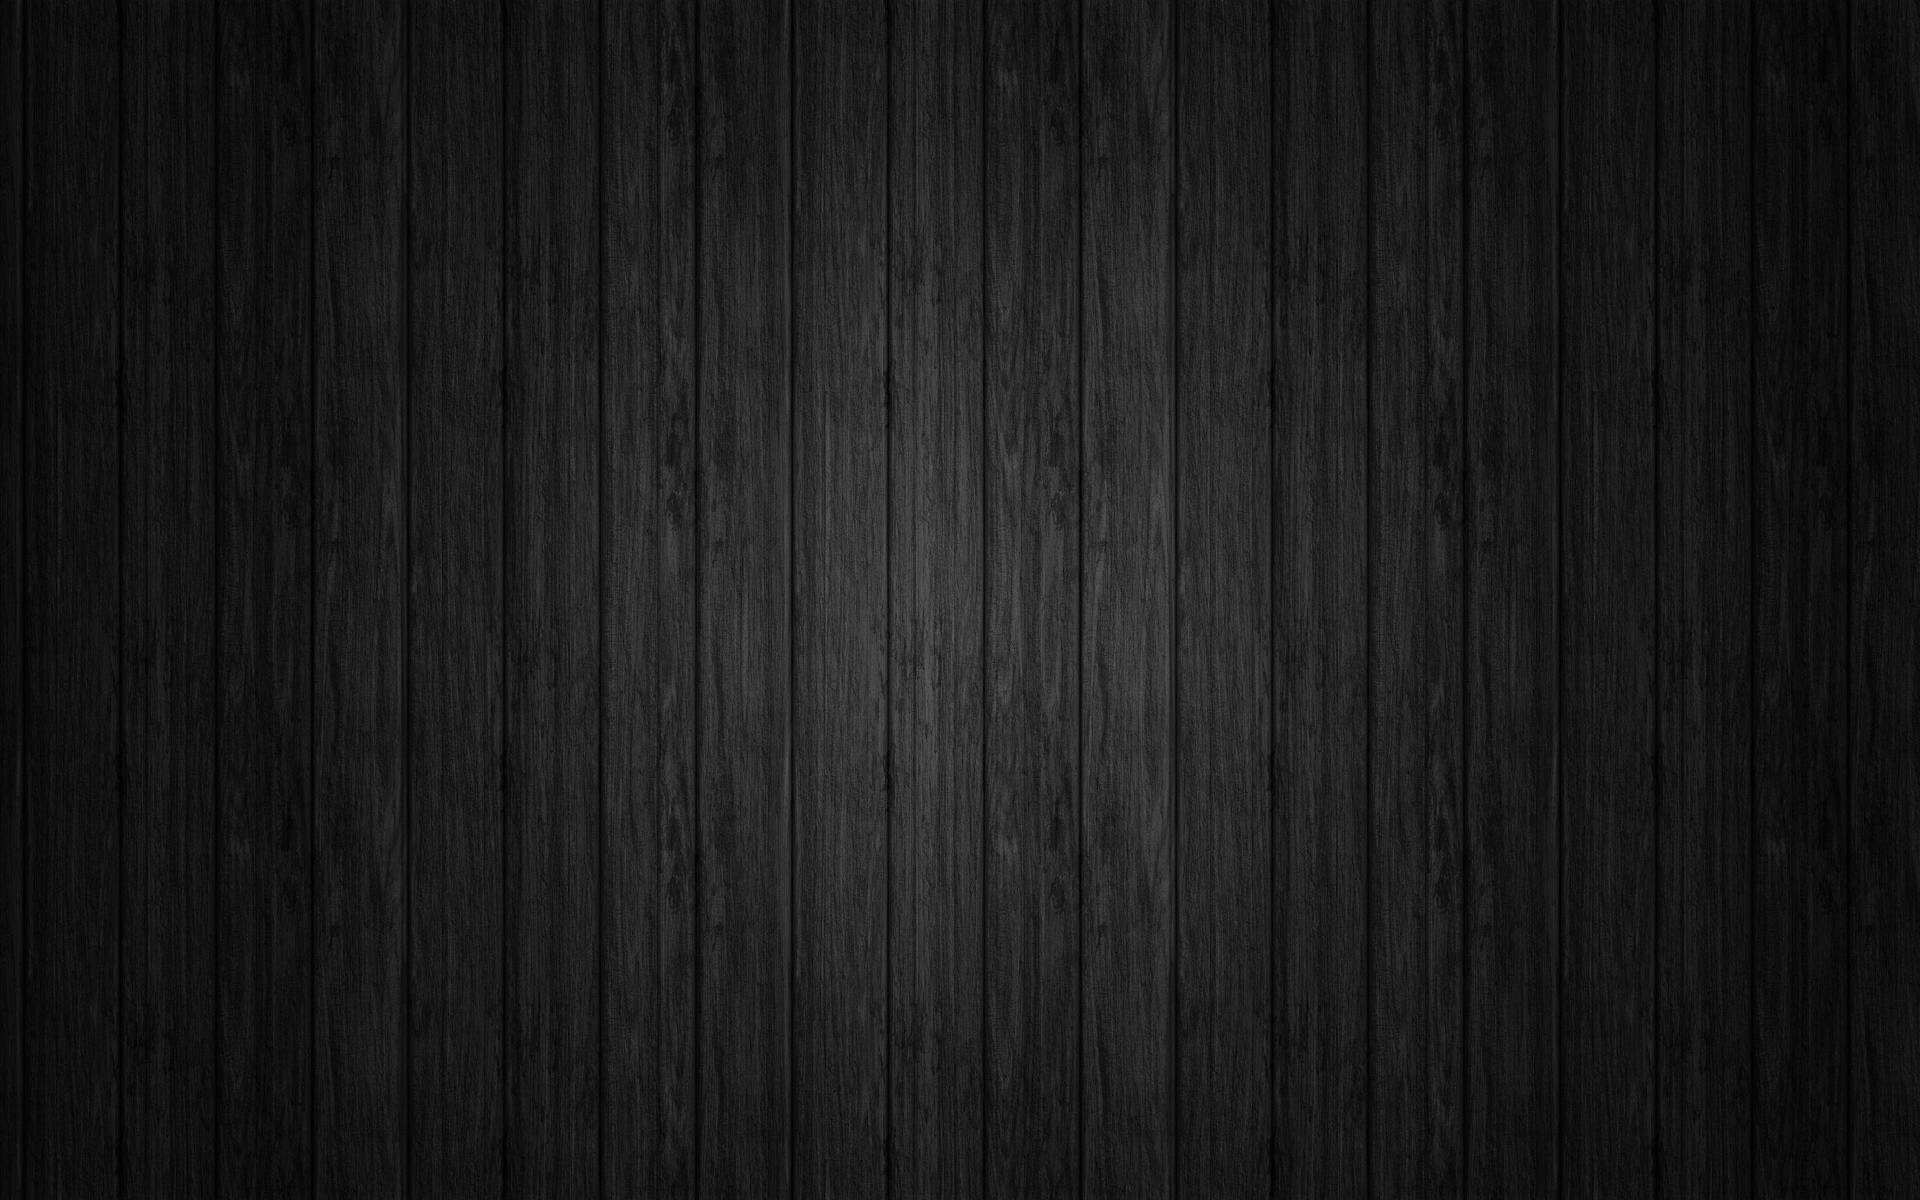 Plain Black With Wooden Pattern Background